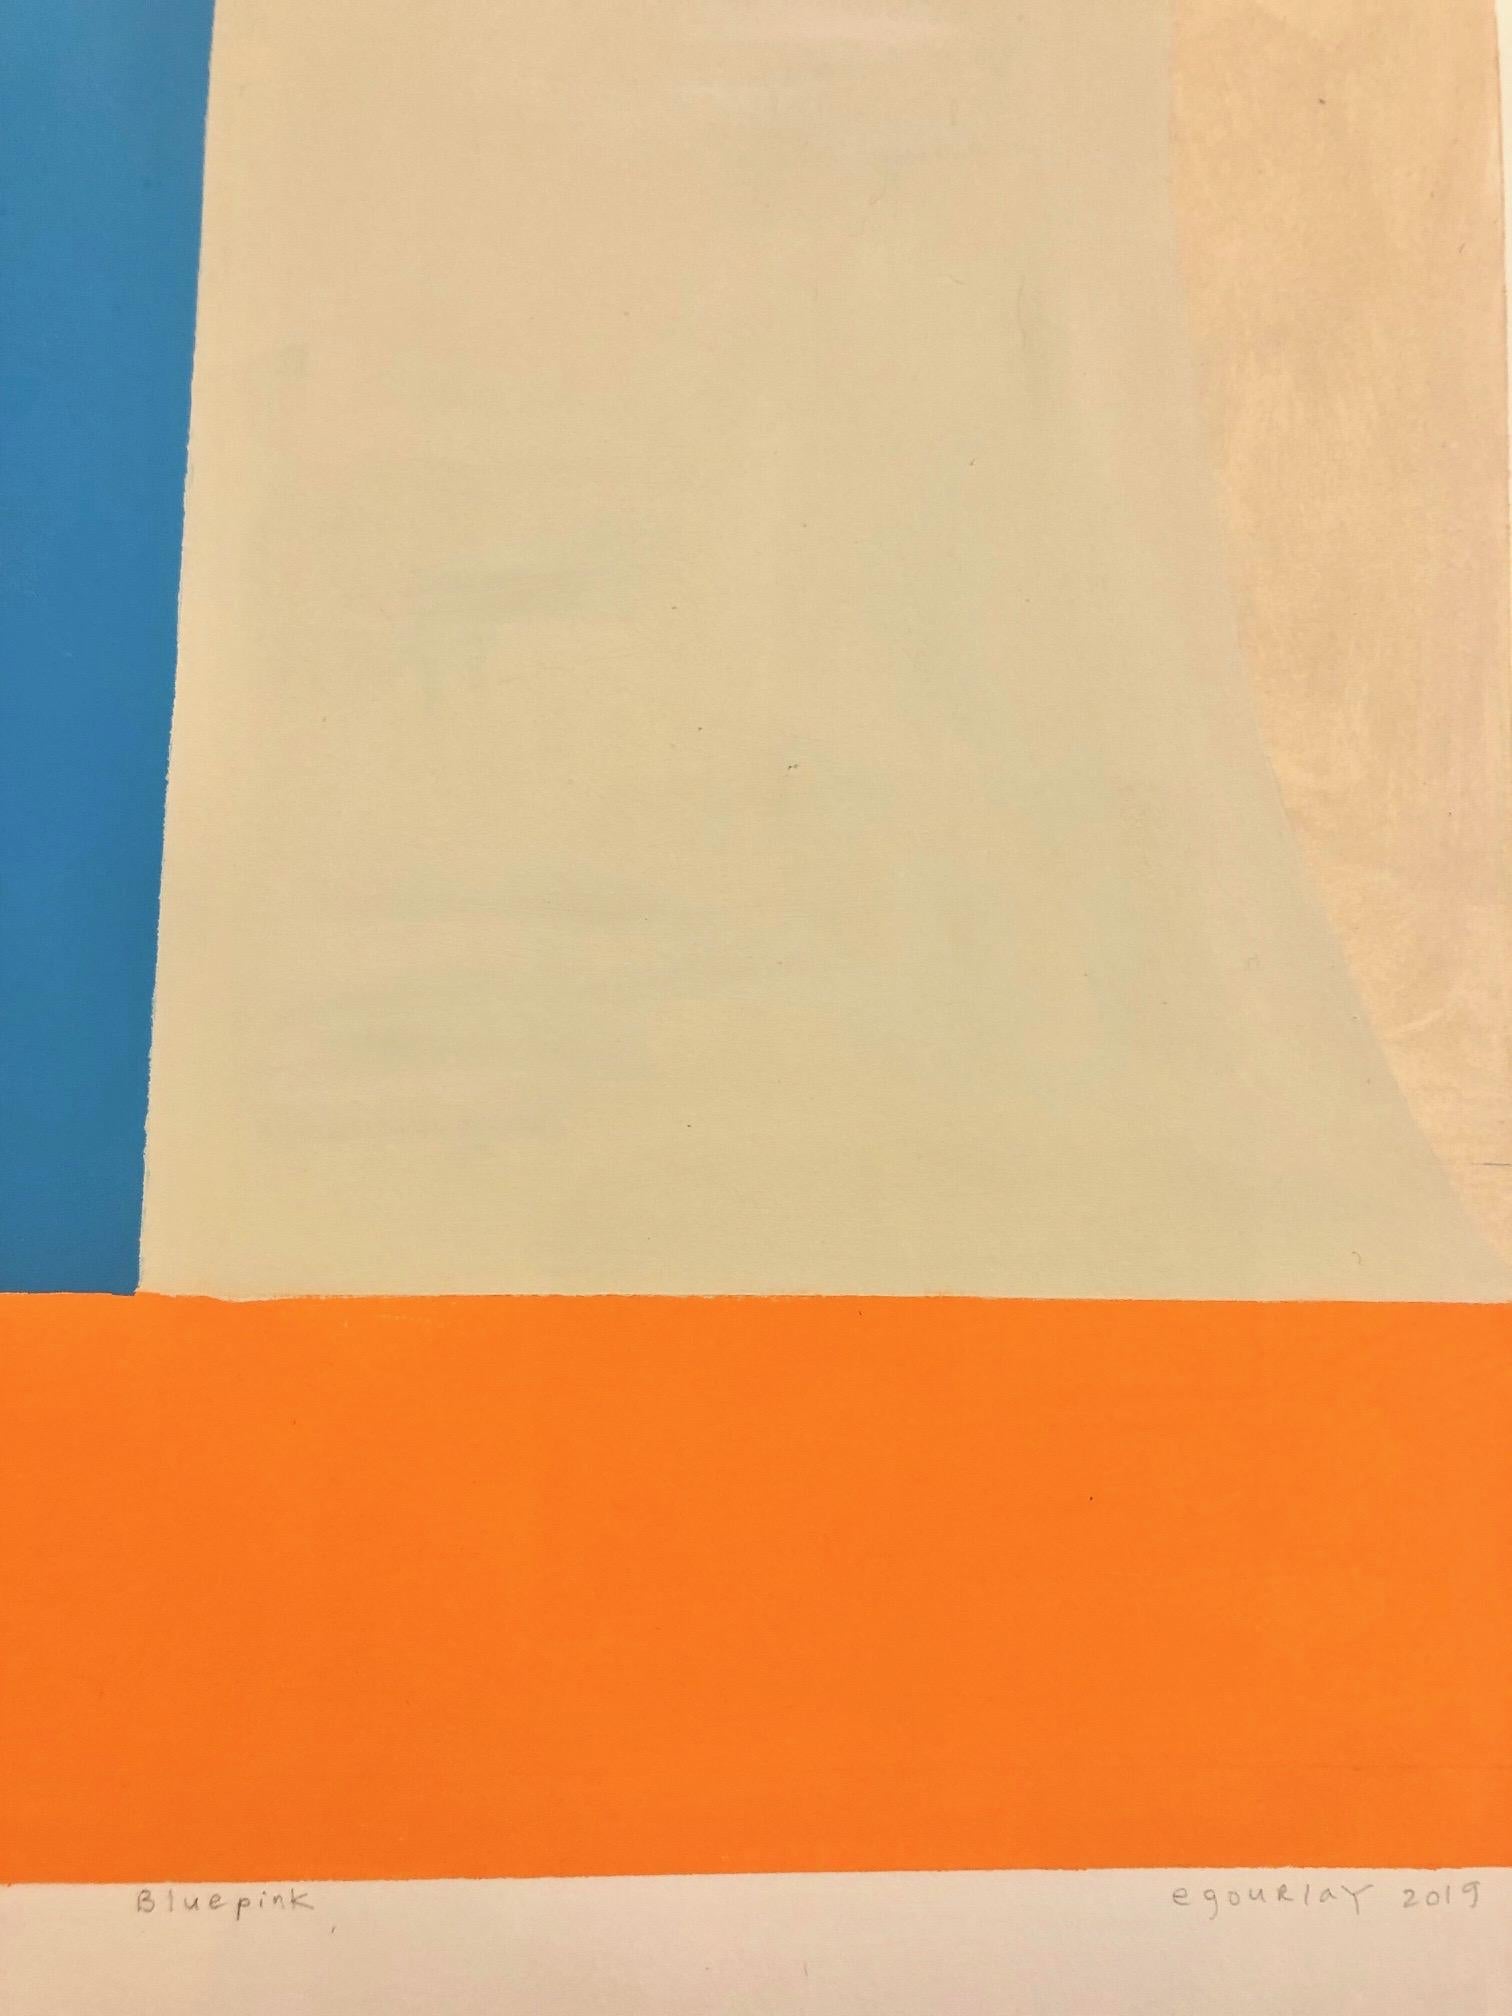 In this abstract painting in gouache on paper by Elizabeth Gourlay, clean and precise, carefully ordered blocks of color in orange, blue and pink are bright against the earthy beige background. Signed, dated and titled on recto, lower right corner.